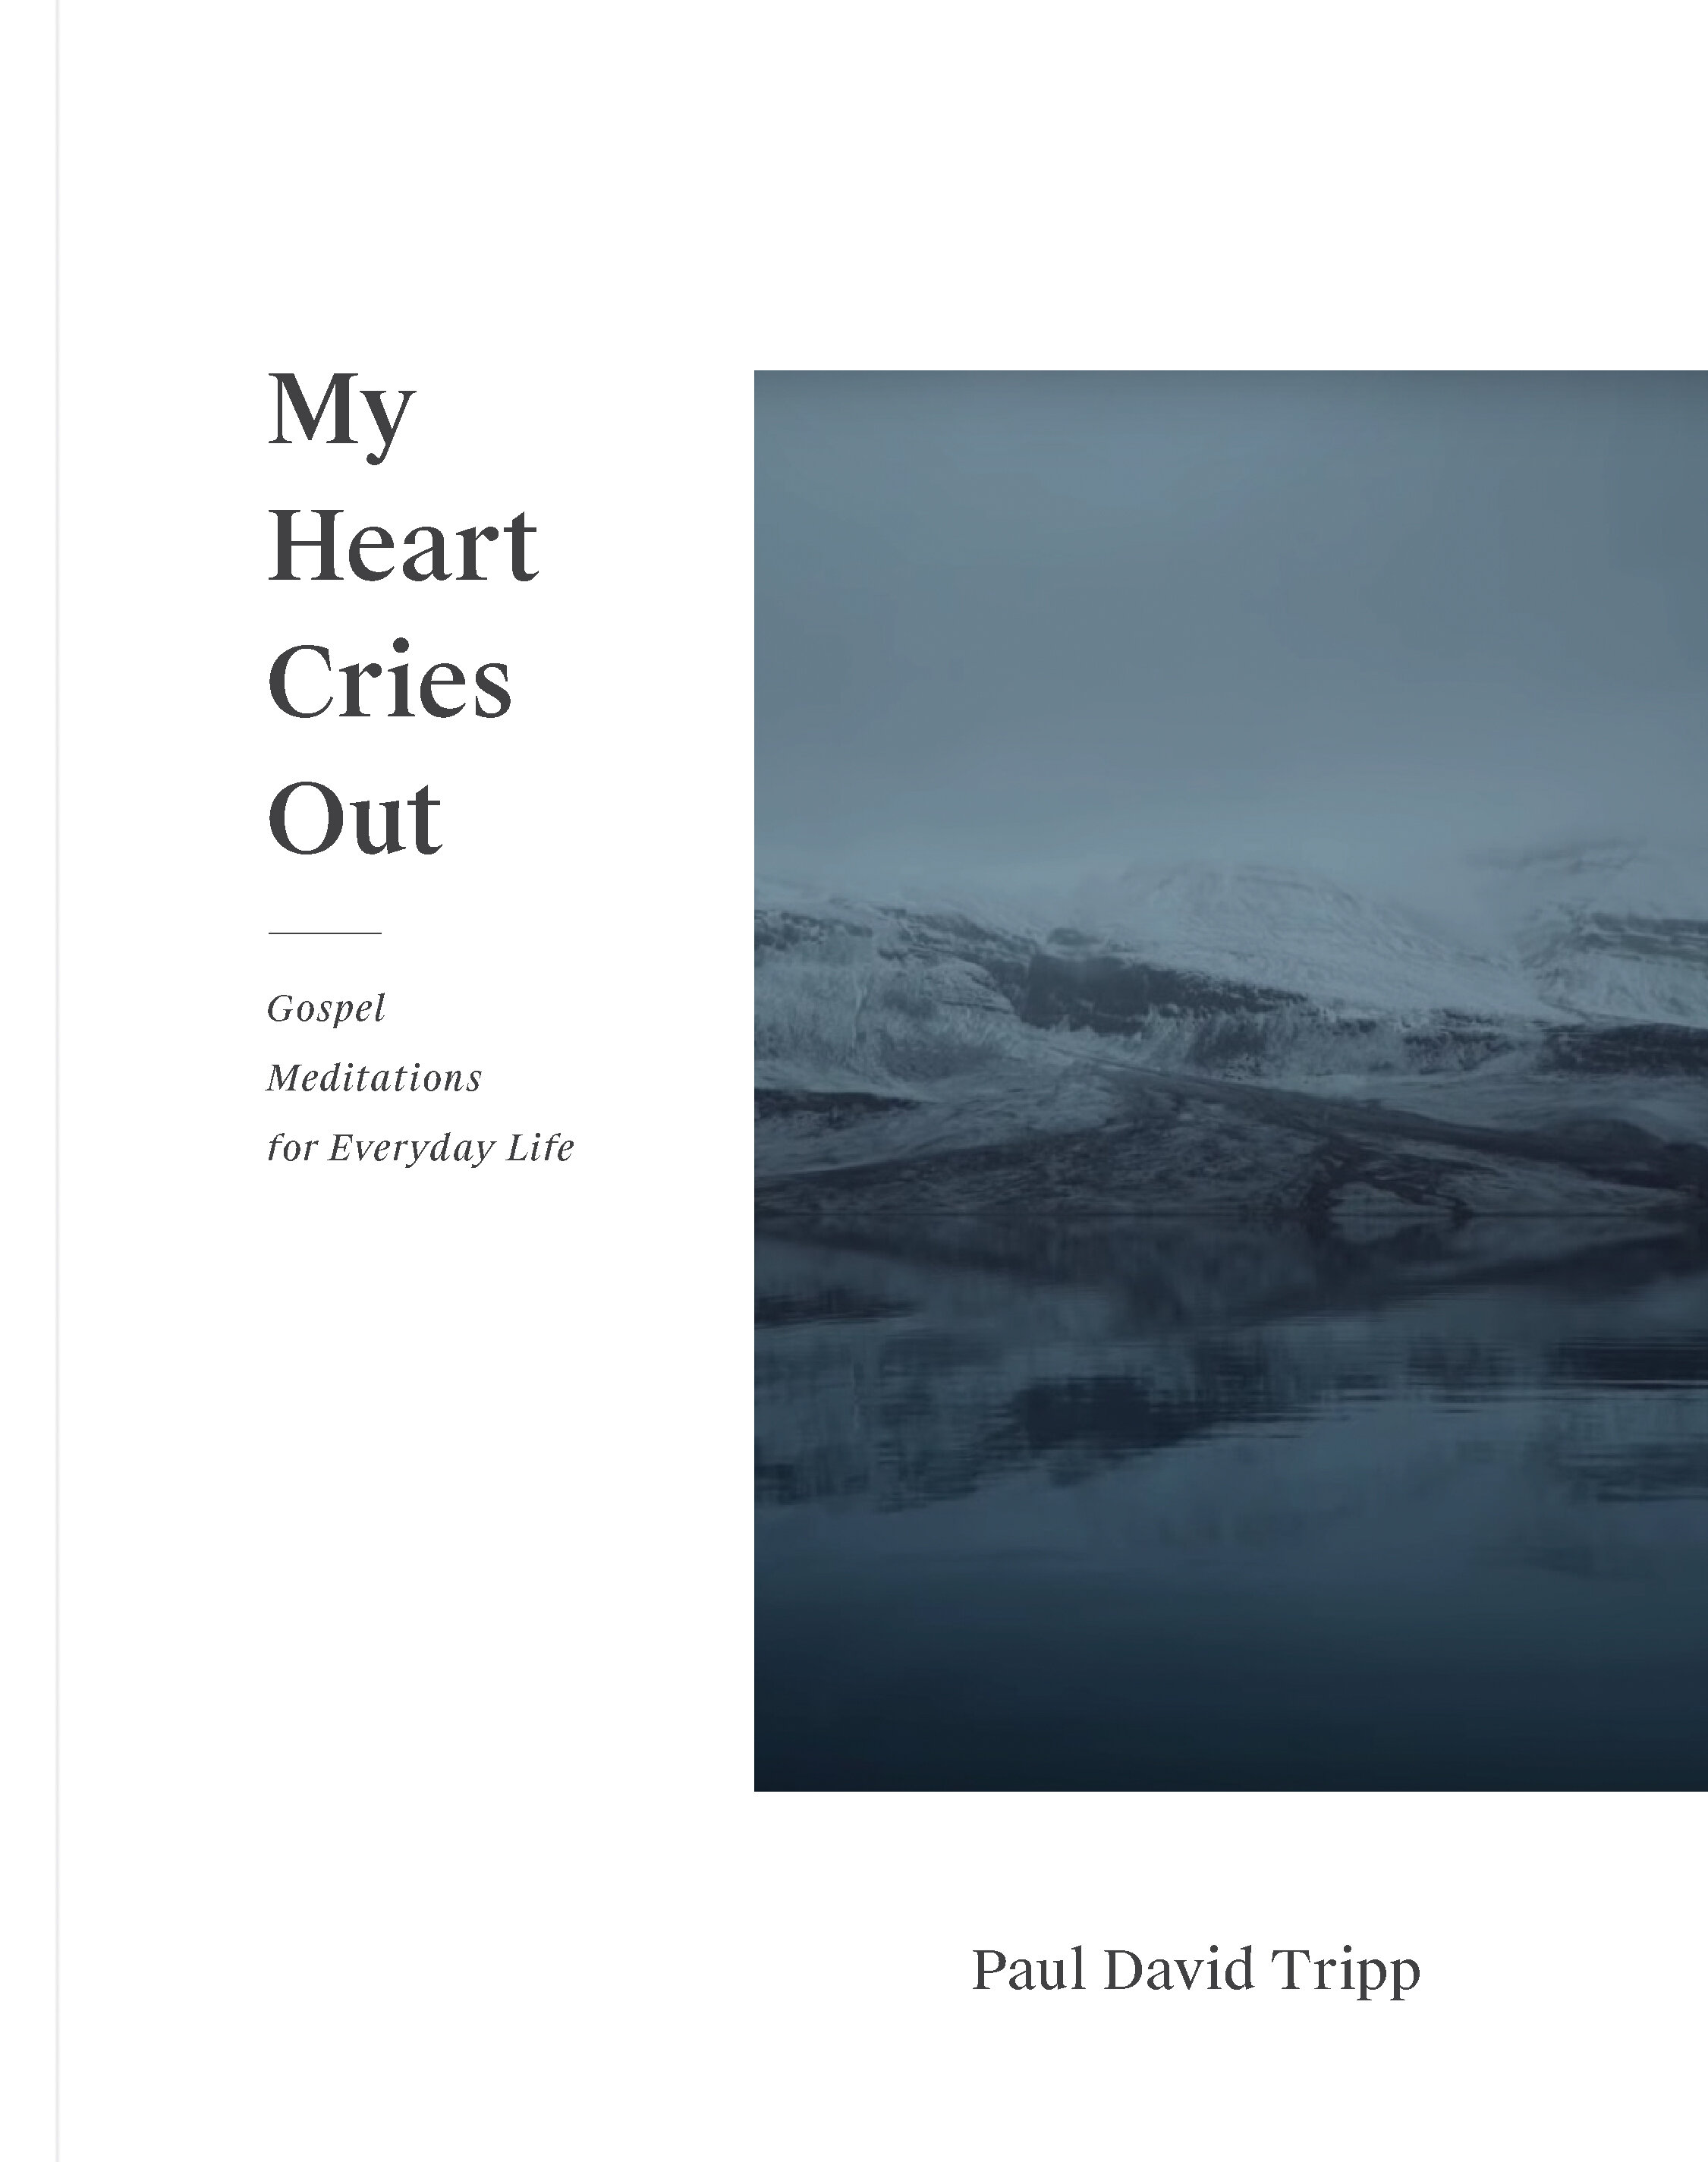 My Heart Cries Out: Gospel Meditations for Everyday Life